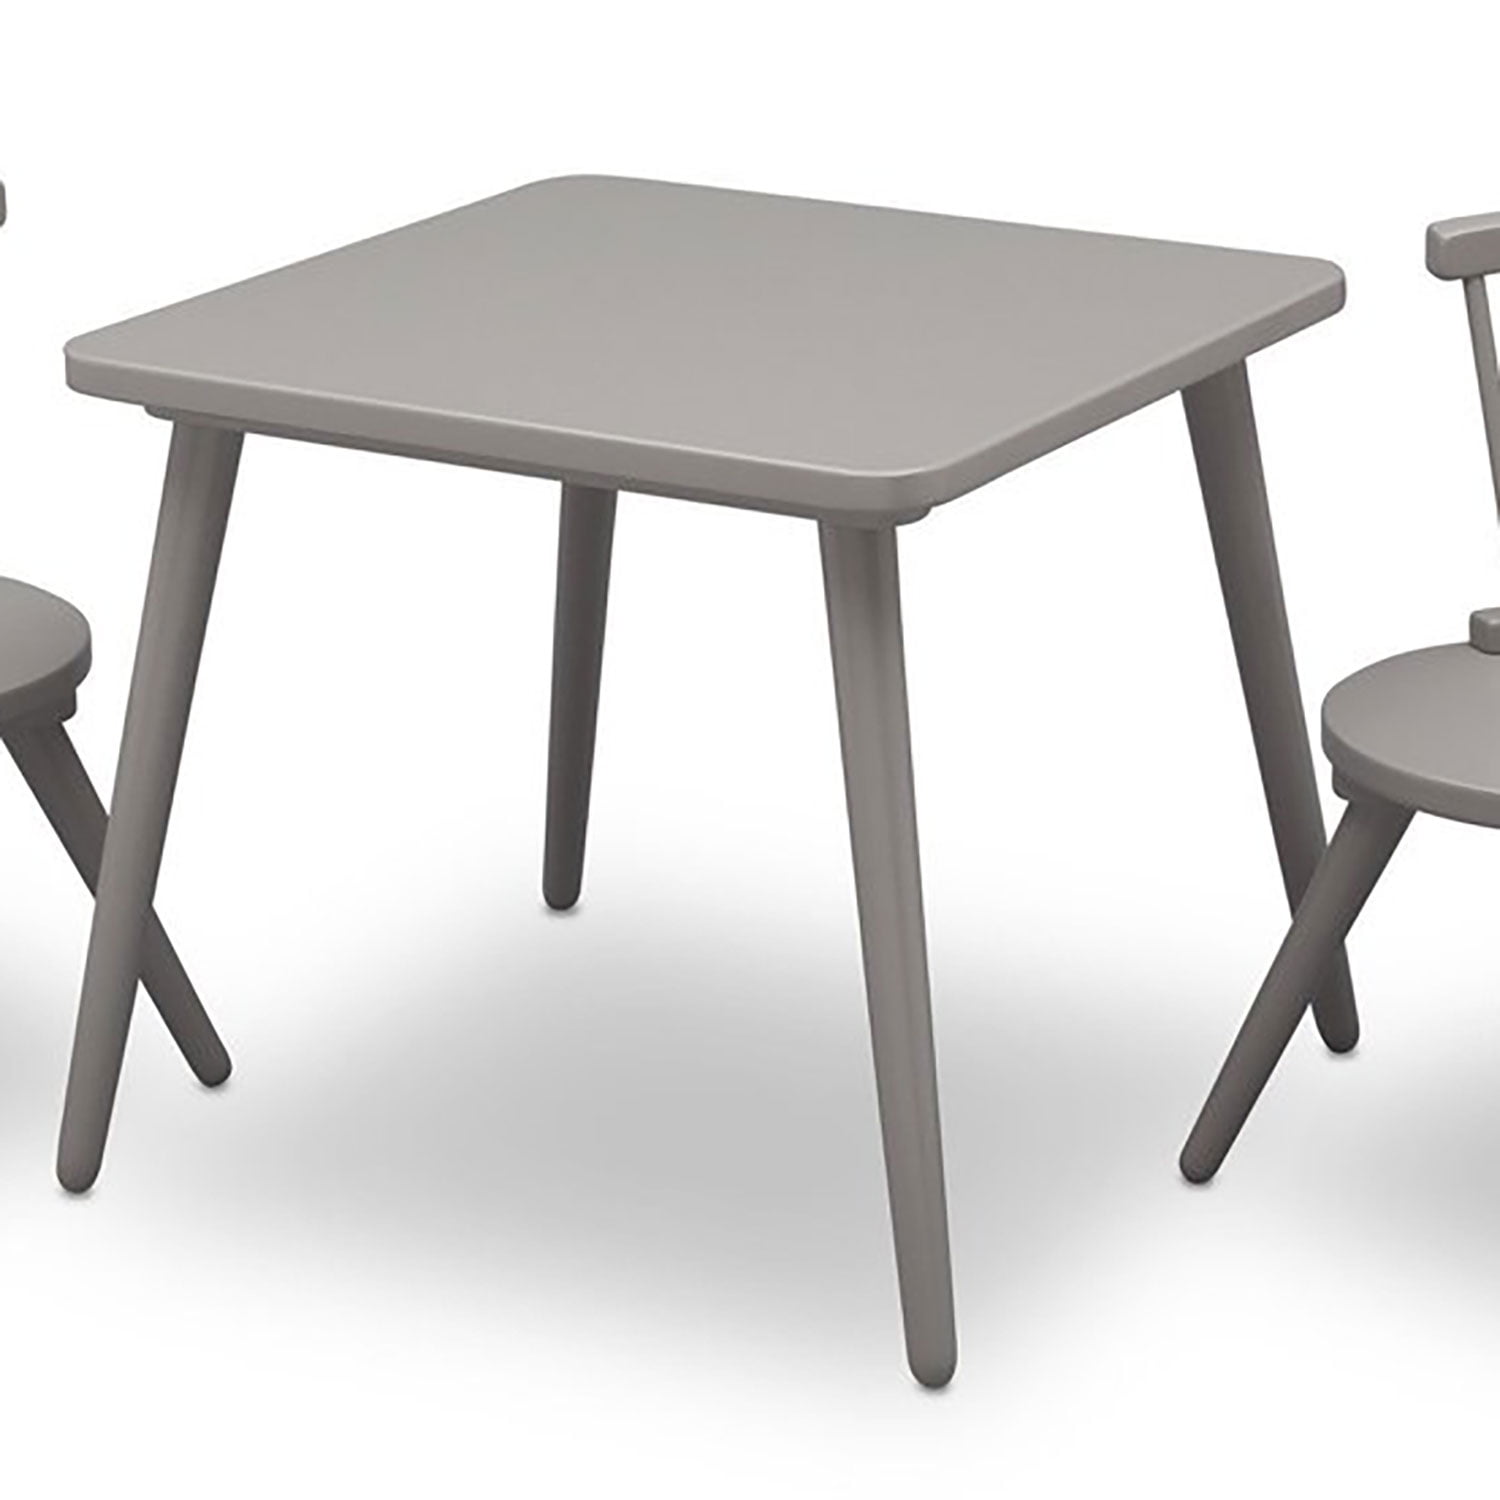 delta windsor table and chairs aqua